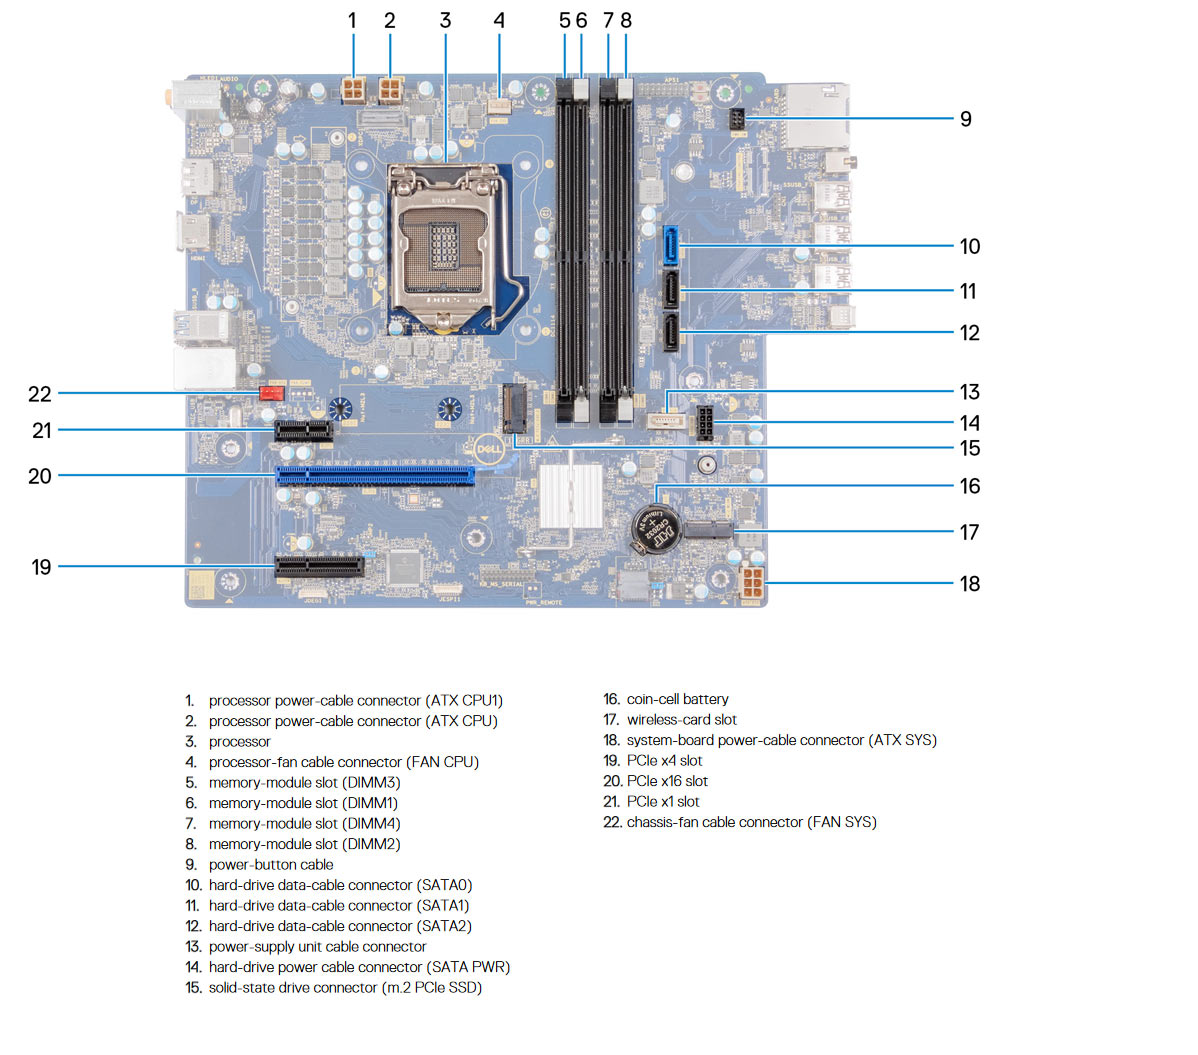 Dell_XPS_8940_motherboard.jpg motherboard layout